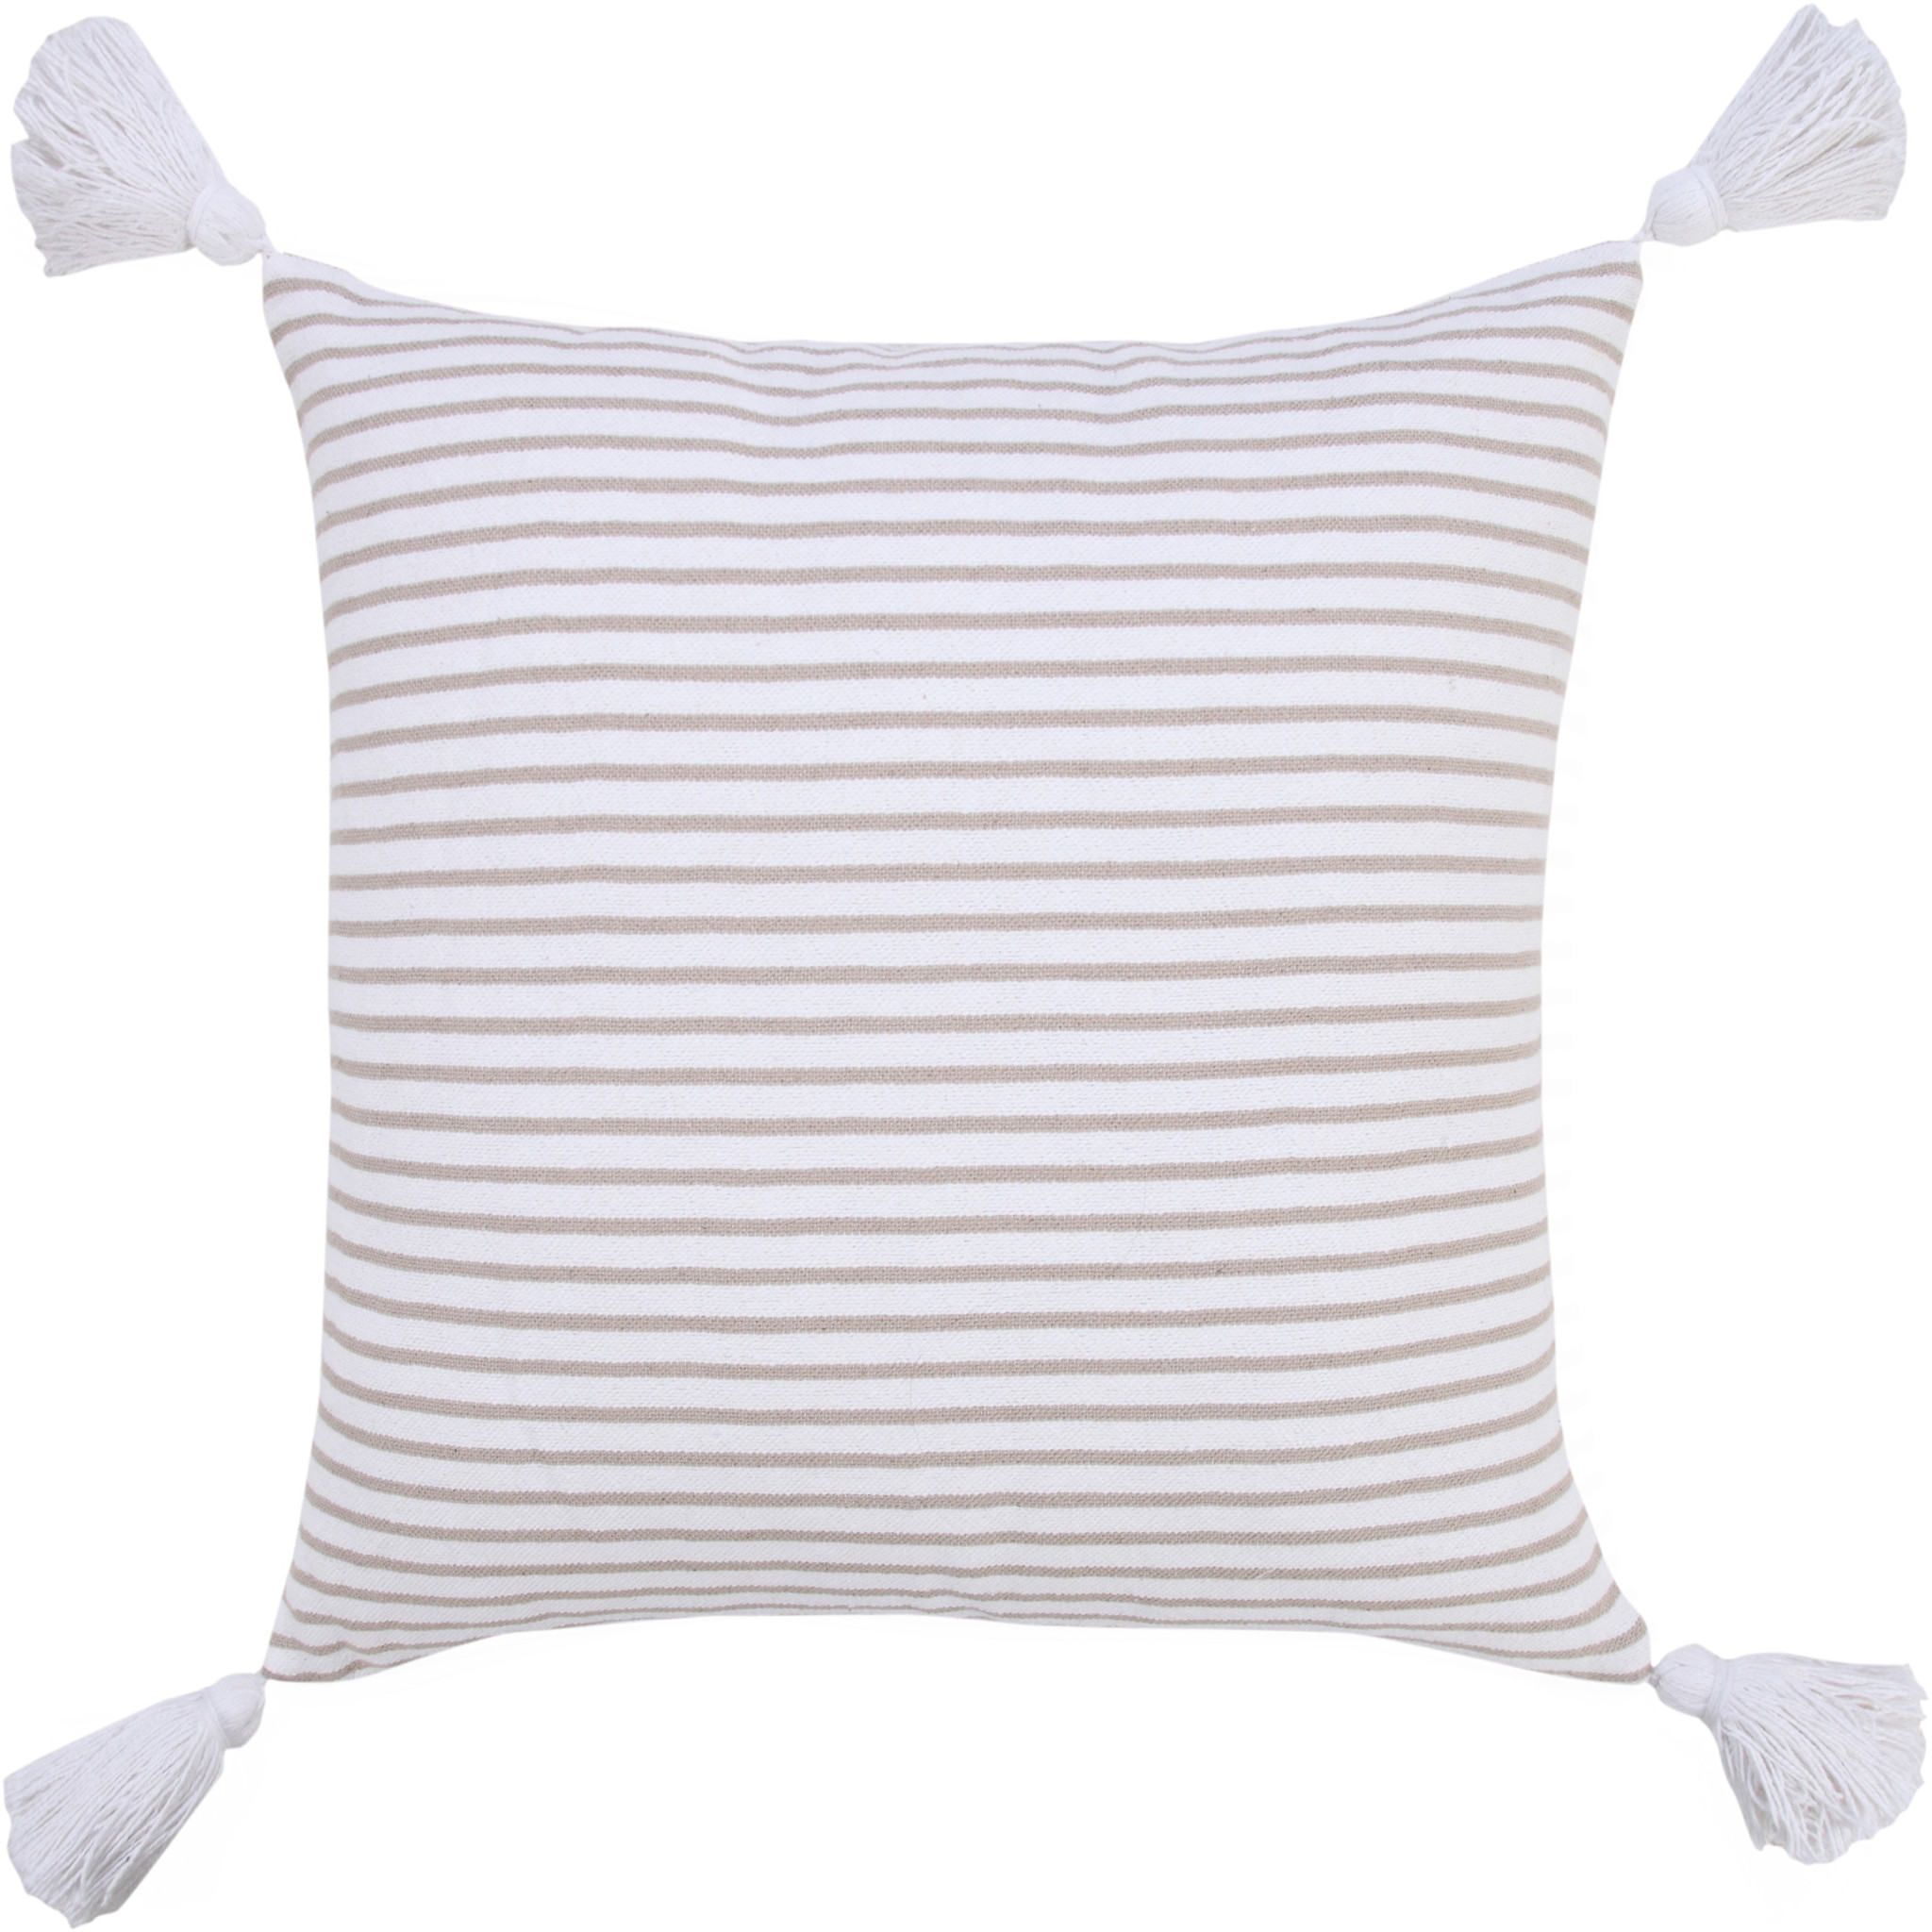 20" X 20" Beige And White 100% Cotton Striped Zippered Pillow-516886-1